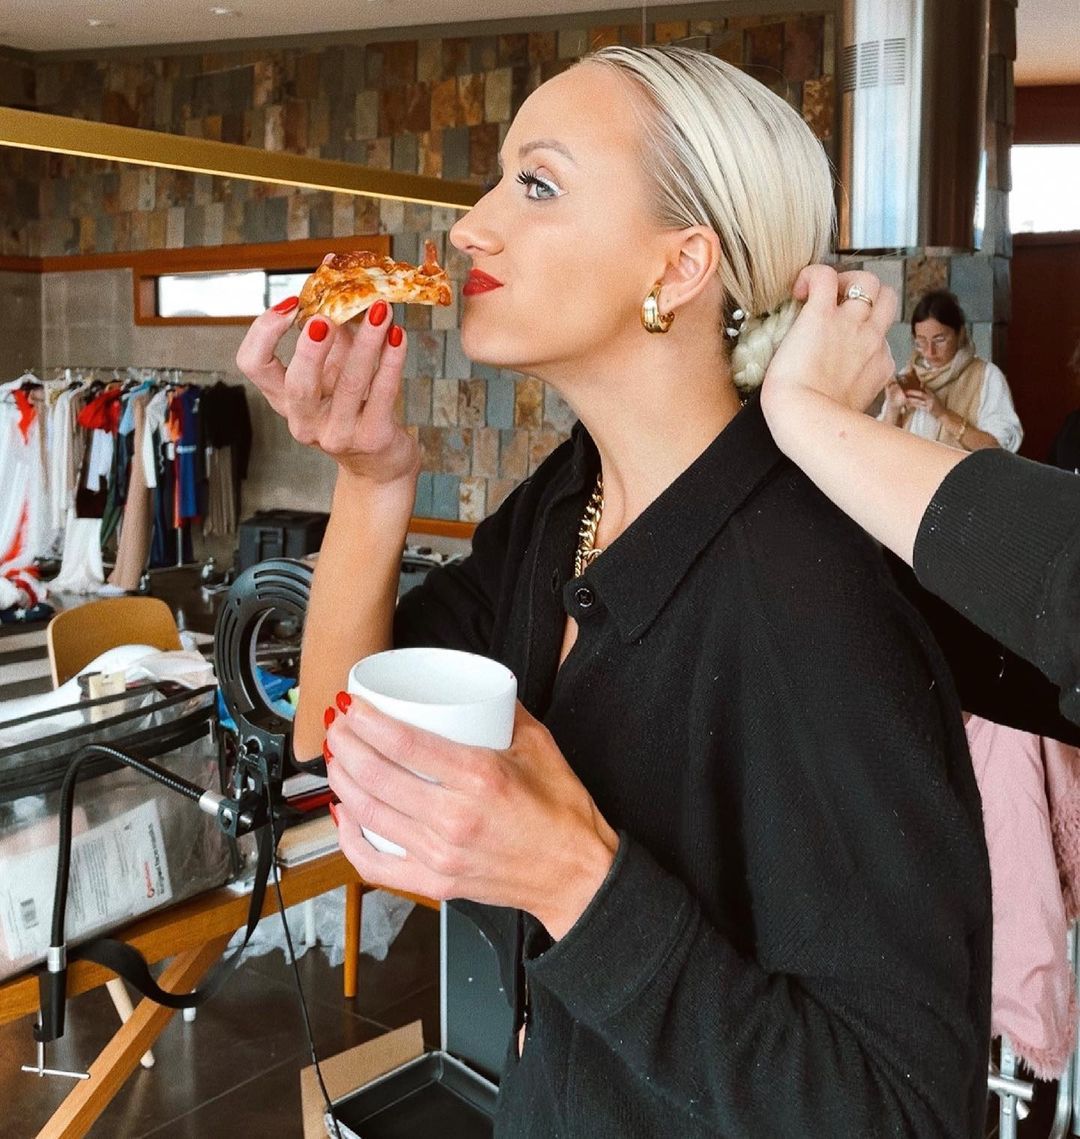 Nastia Liukin with pizza in a shirt